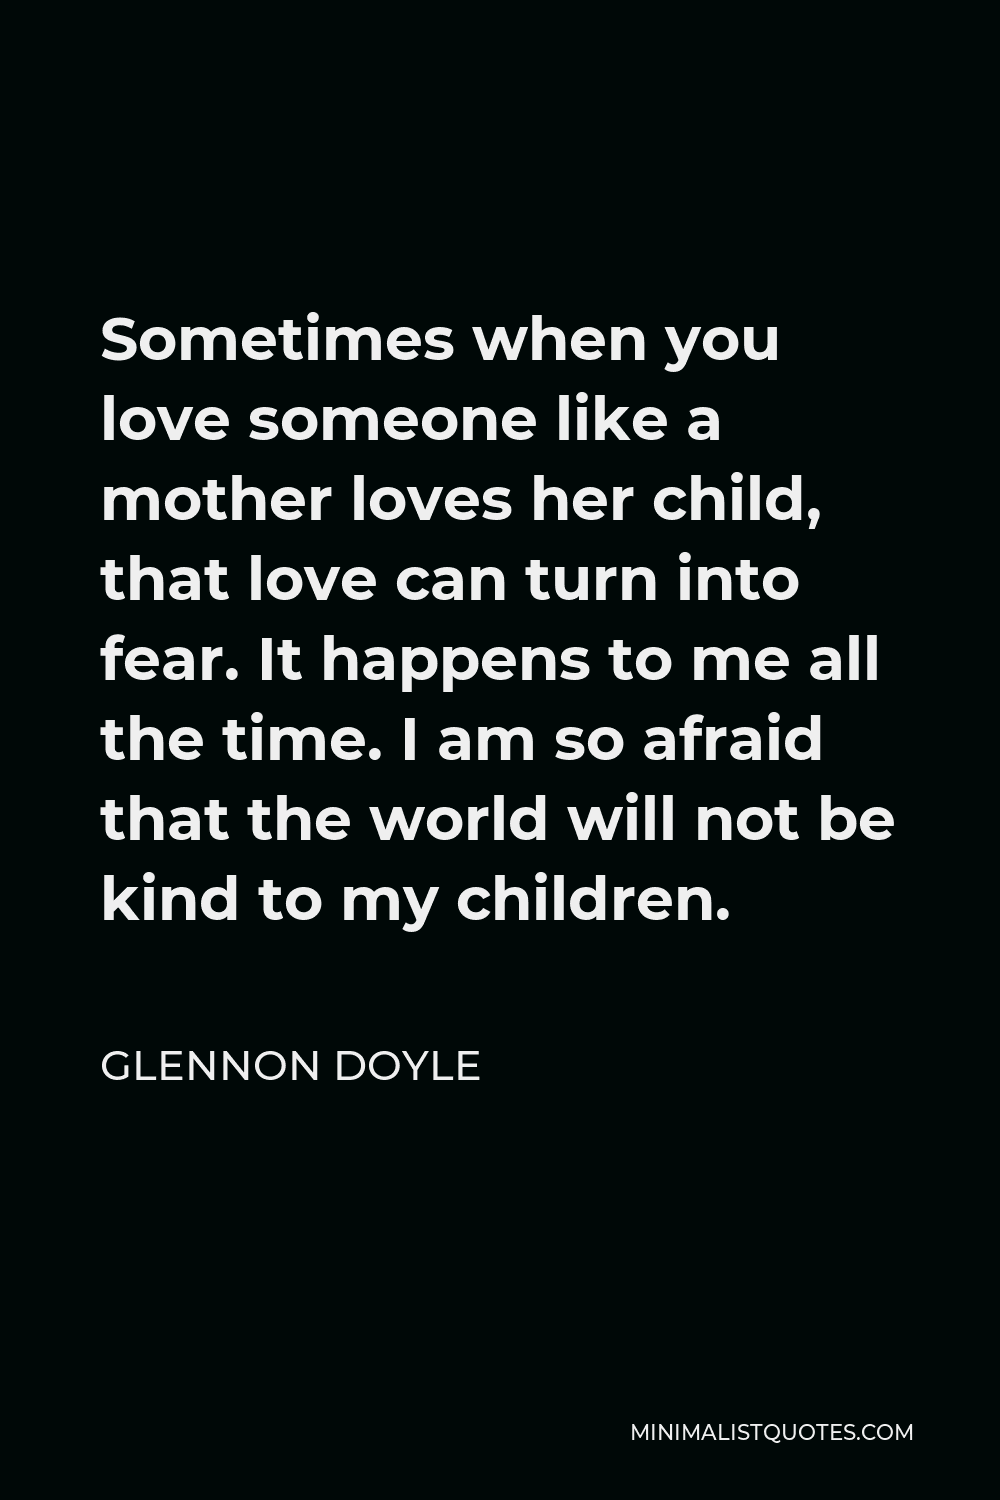 Glennon Doyle Quote - Sometimes when you love someone like a mother loves her child, that love can turn into fear. It happens to me all the time. I am so afraid that the world will not be kind to my children.